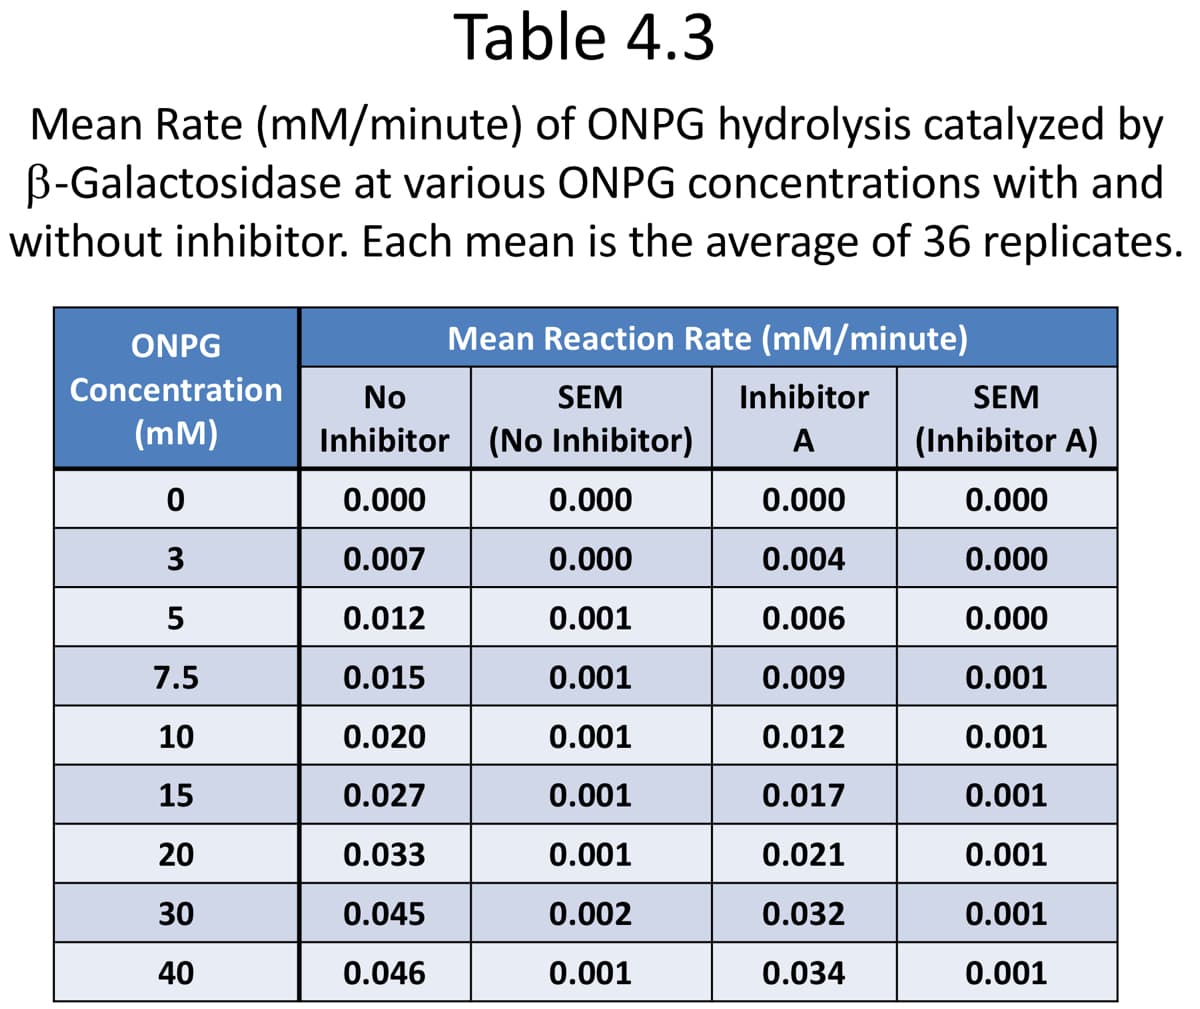 Table 4.3
Mean Rate (mm/minute) of ONPG hydrolysis catalyzed by
ß-Galactosidase at various ONPG concentrations with and
without inhibitor. Each mean is the average of 36 replicates.
ONPG
Concentration
(MM)
0
3
5
7.5
10
15
20
30
40
Mean Reaction Rate (mm/minute)
SEM
No
Inhibitor (No Inhibitor)
0.000
0.000
0.007
0.000
0.012
0.001
0.015
0.001
0.020
0.001
0.027
0.001
0.033
0.001
0.045
0.002
0.046
0.001
Inhibitor
A
0.000
0.004
0.006
0.009
0.012
0.017
0.021
0.032
0.034
SEM
(Inhibitor A)
0.000
0.000
0.000
0.001
0.001
0.001
0.001
0.001
0.001